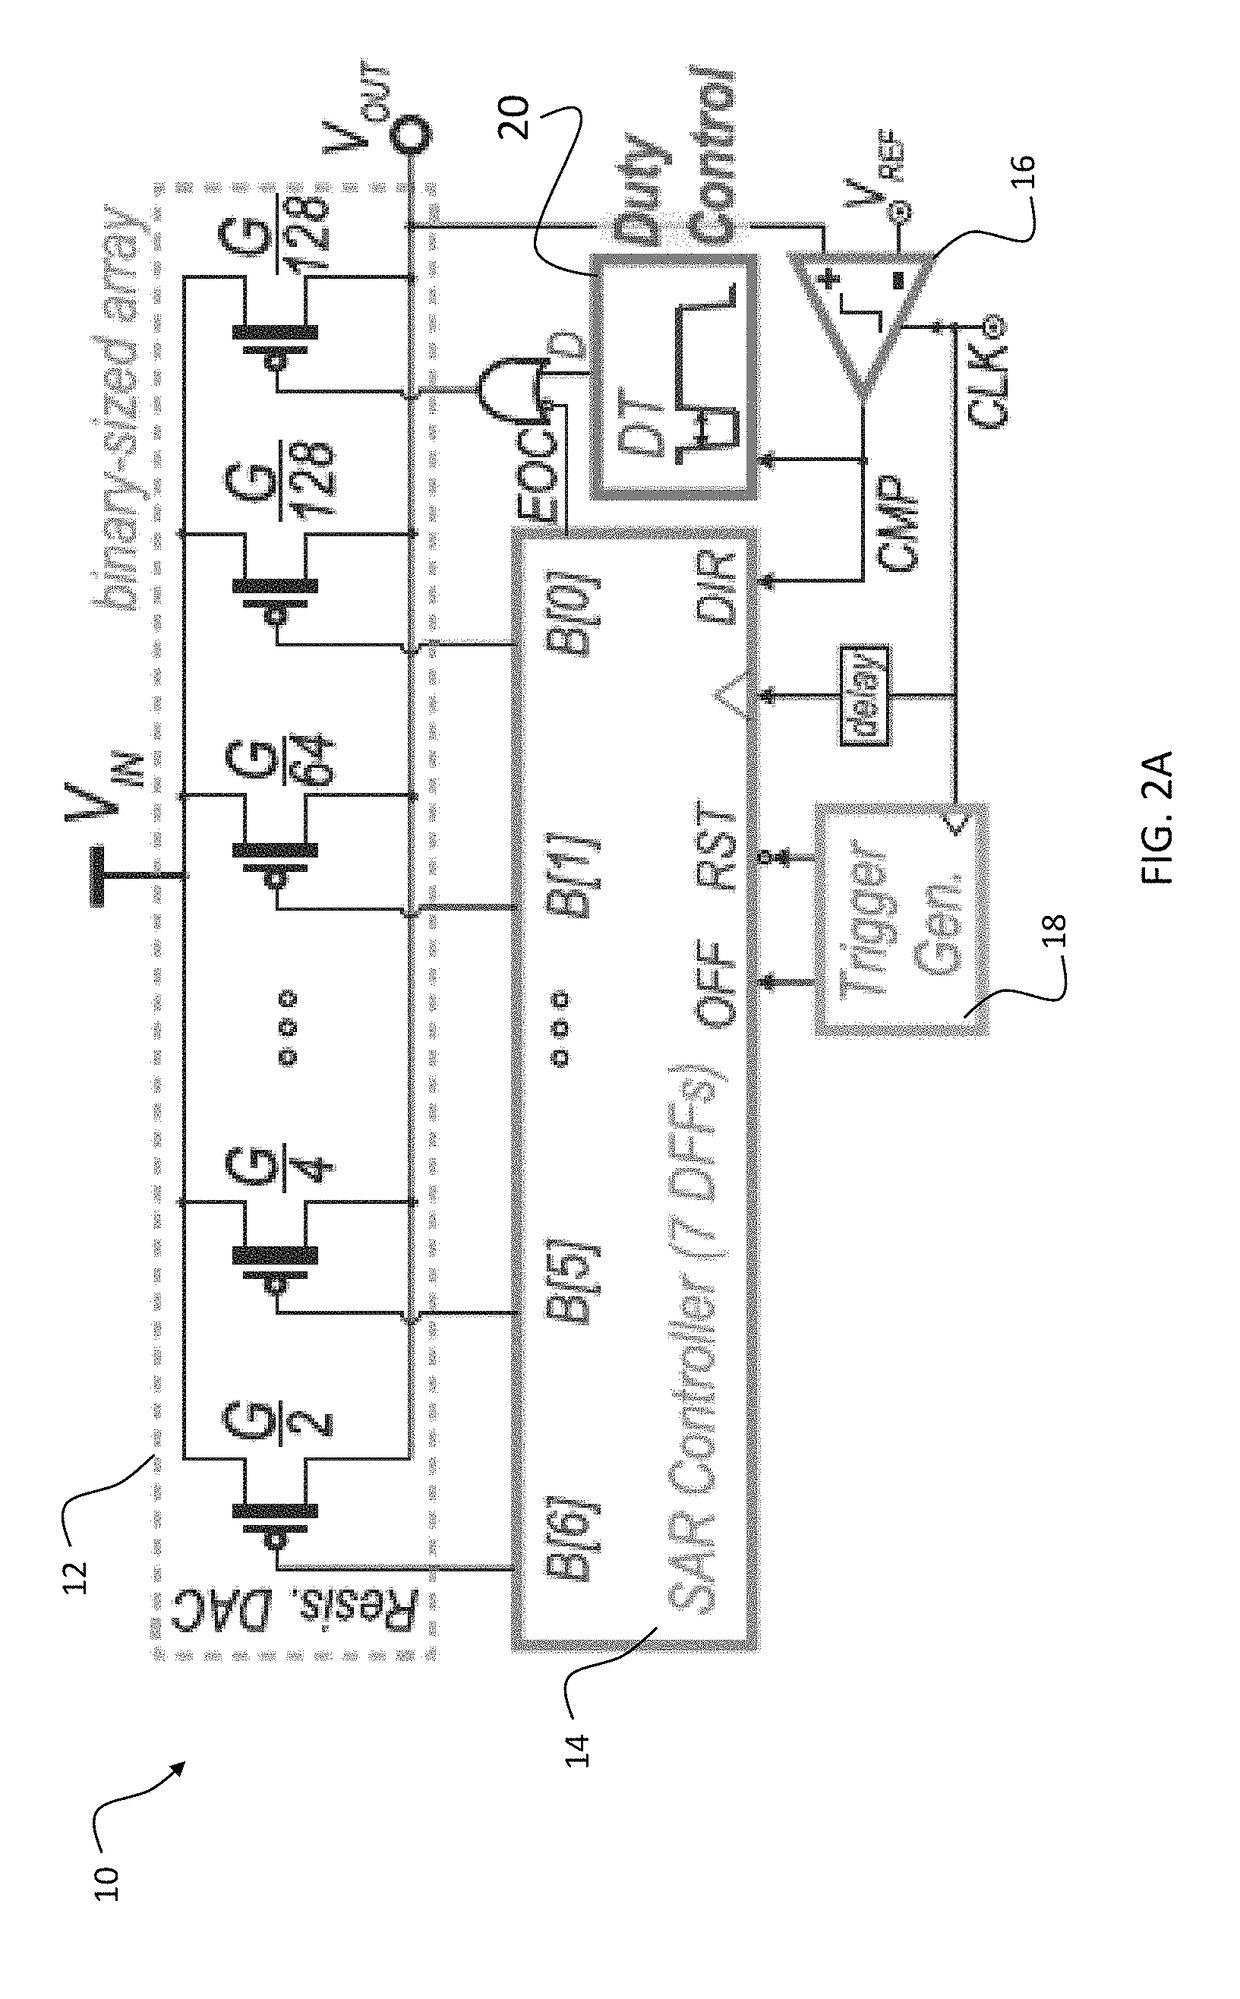 Successive approximation digital voltage regulation methods, devices and systems